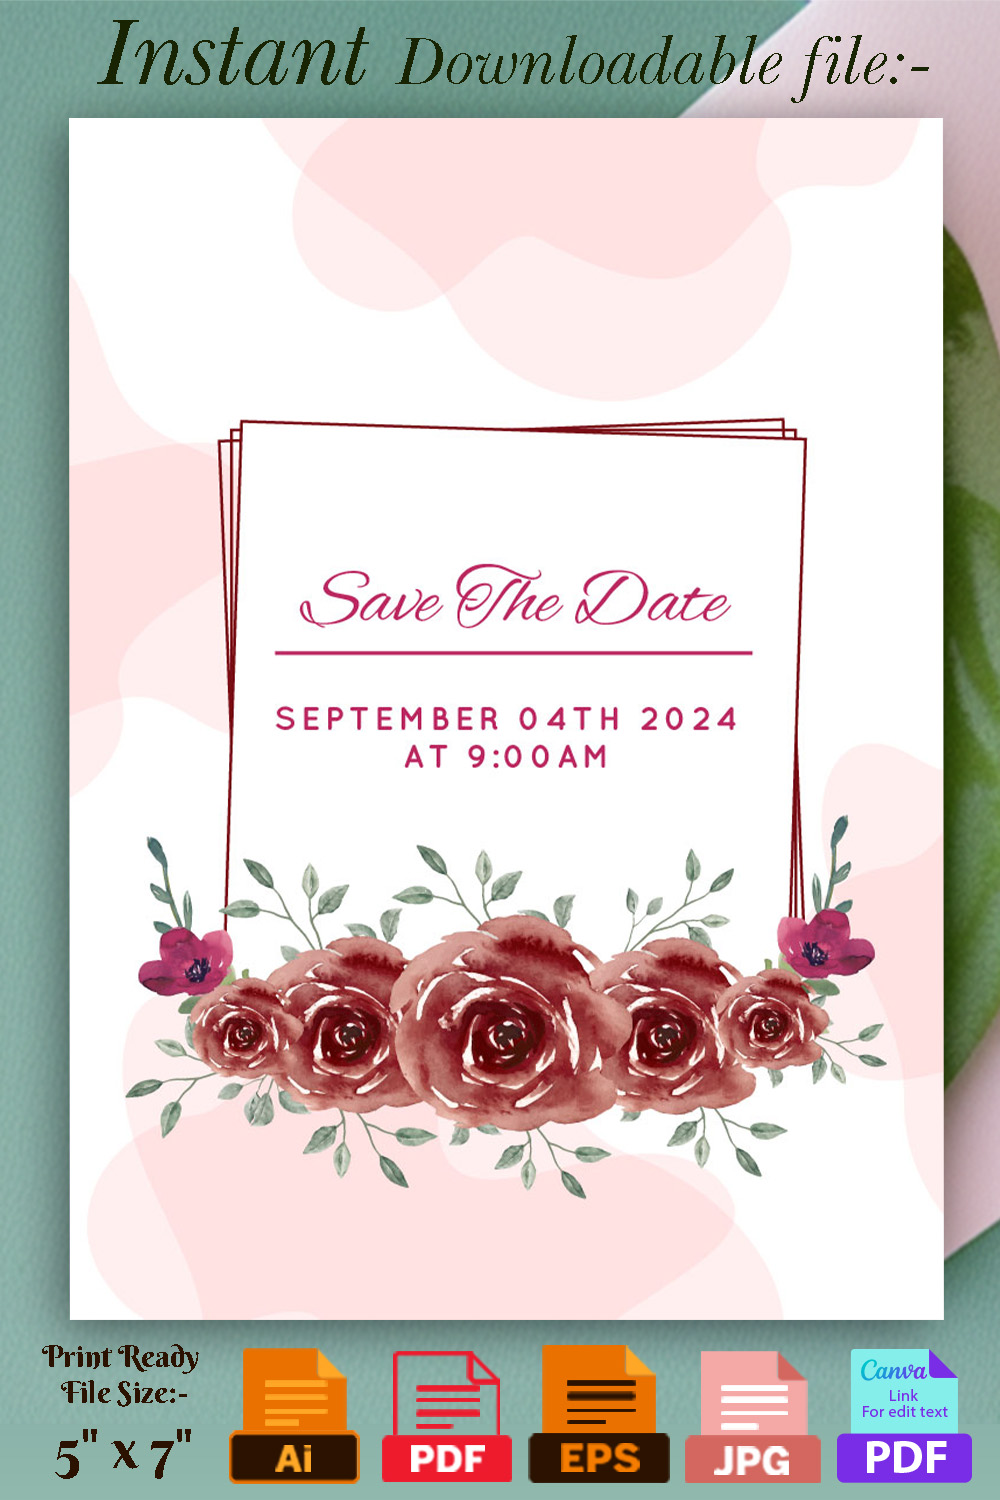 Image of charming wedding invitation with brown roses and leaves.